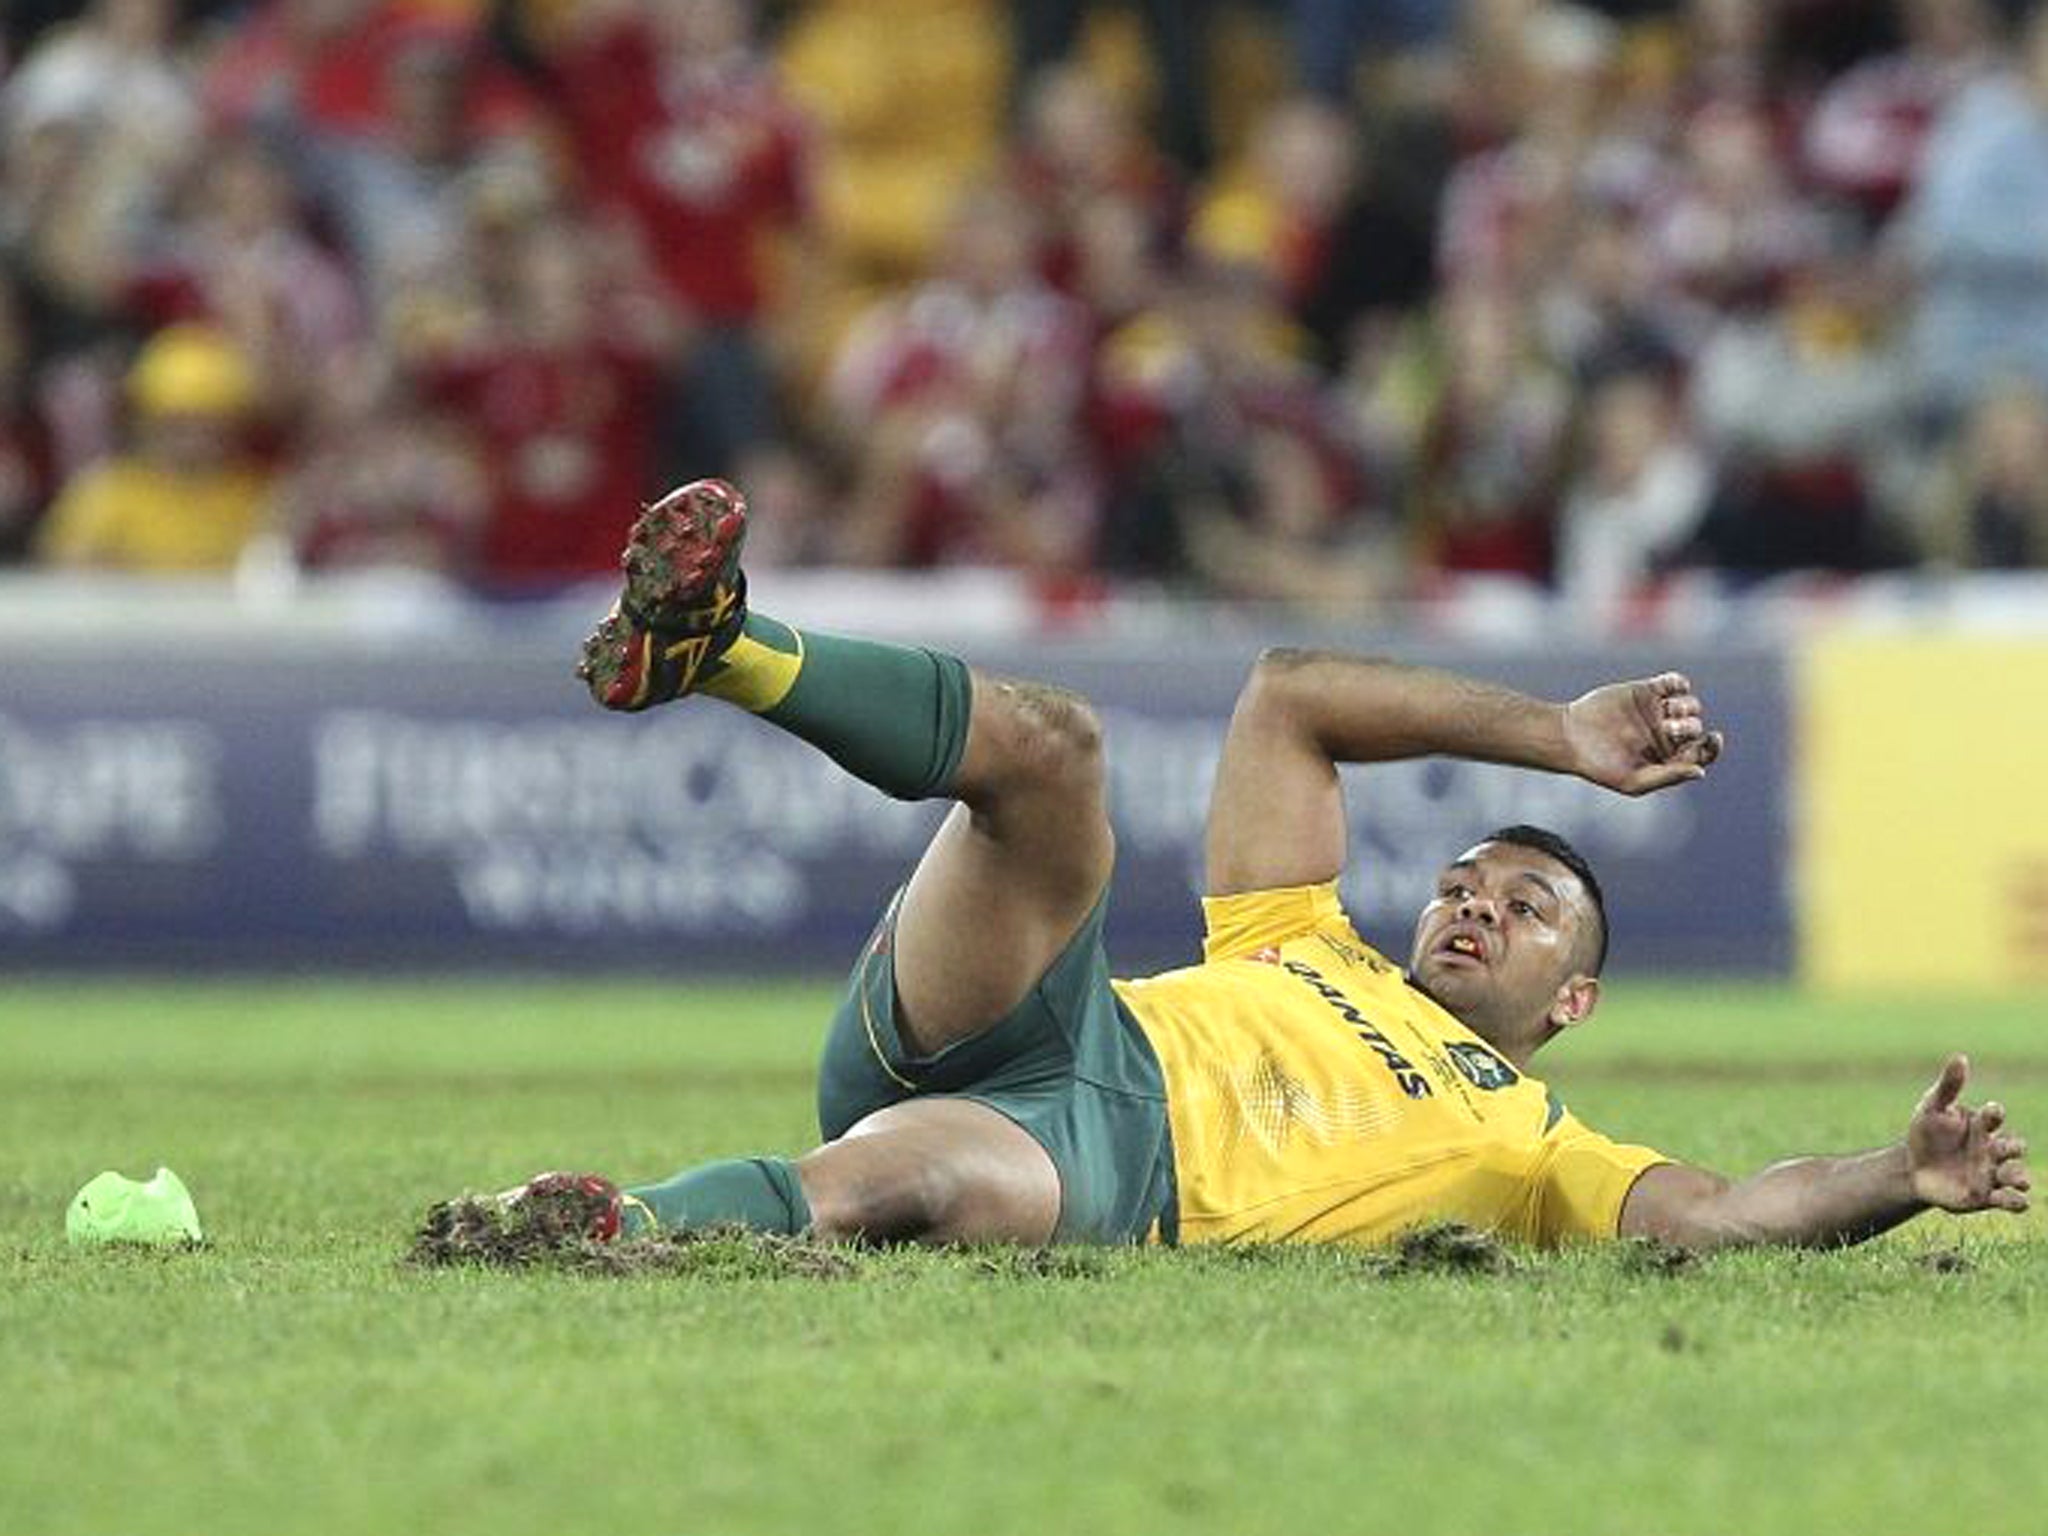 Kurtley Beale slips and falls as he fails to kick the final penalty which would have given Australia victory against the British and Irish Lions during the First test match in Brisbane